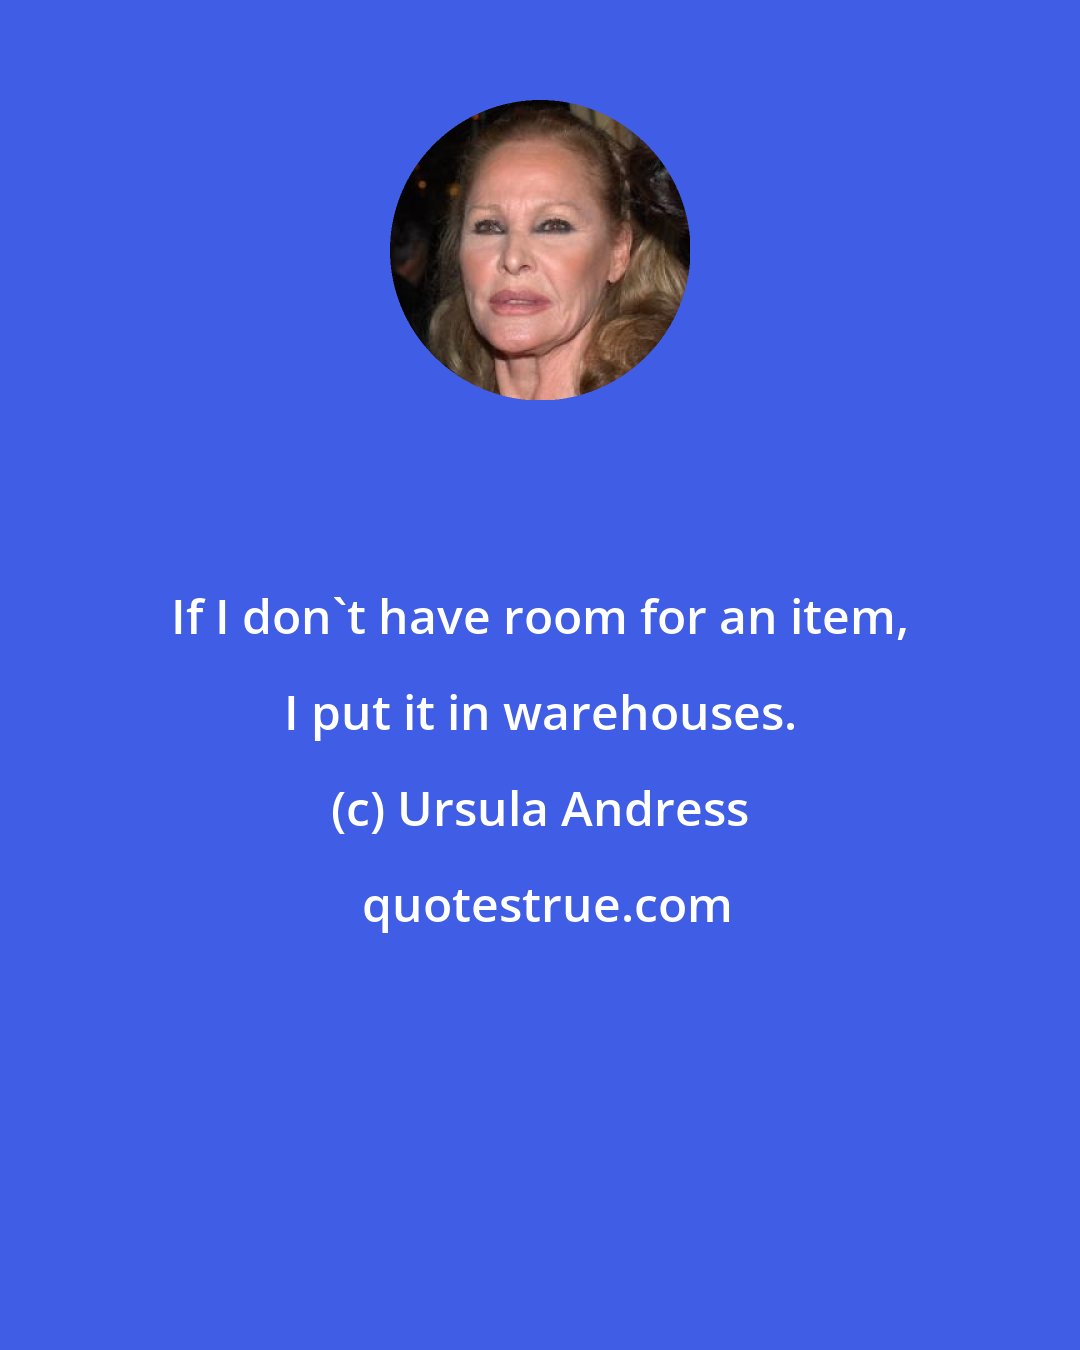 Ursula Andress: If I don't have room for an item, I put it in warehouses.